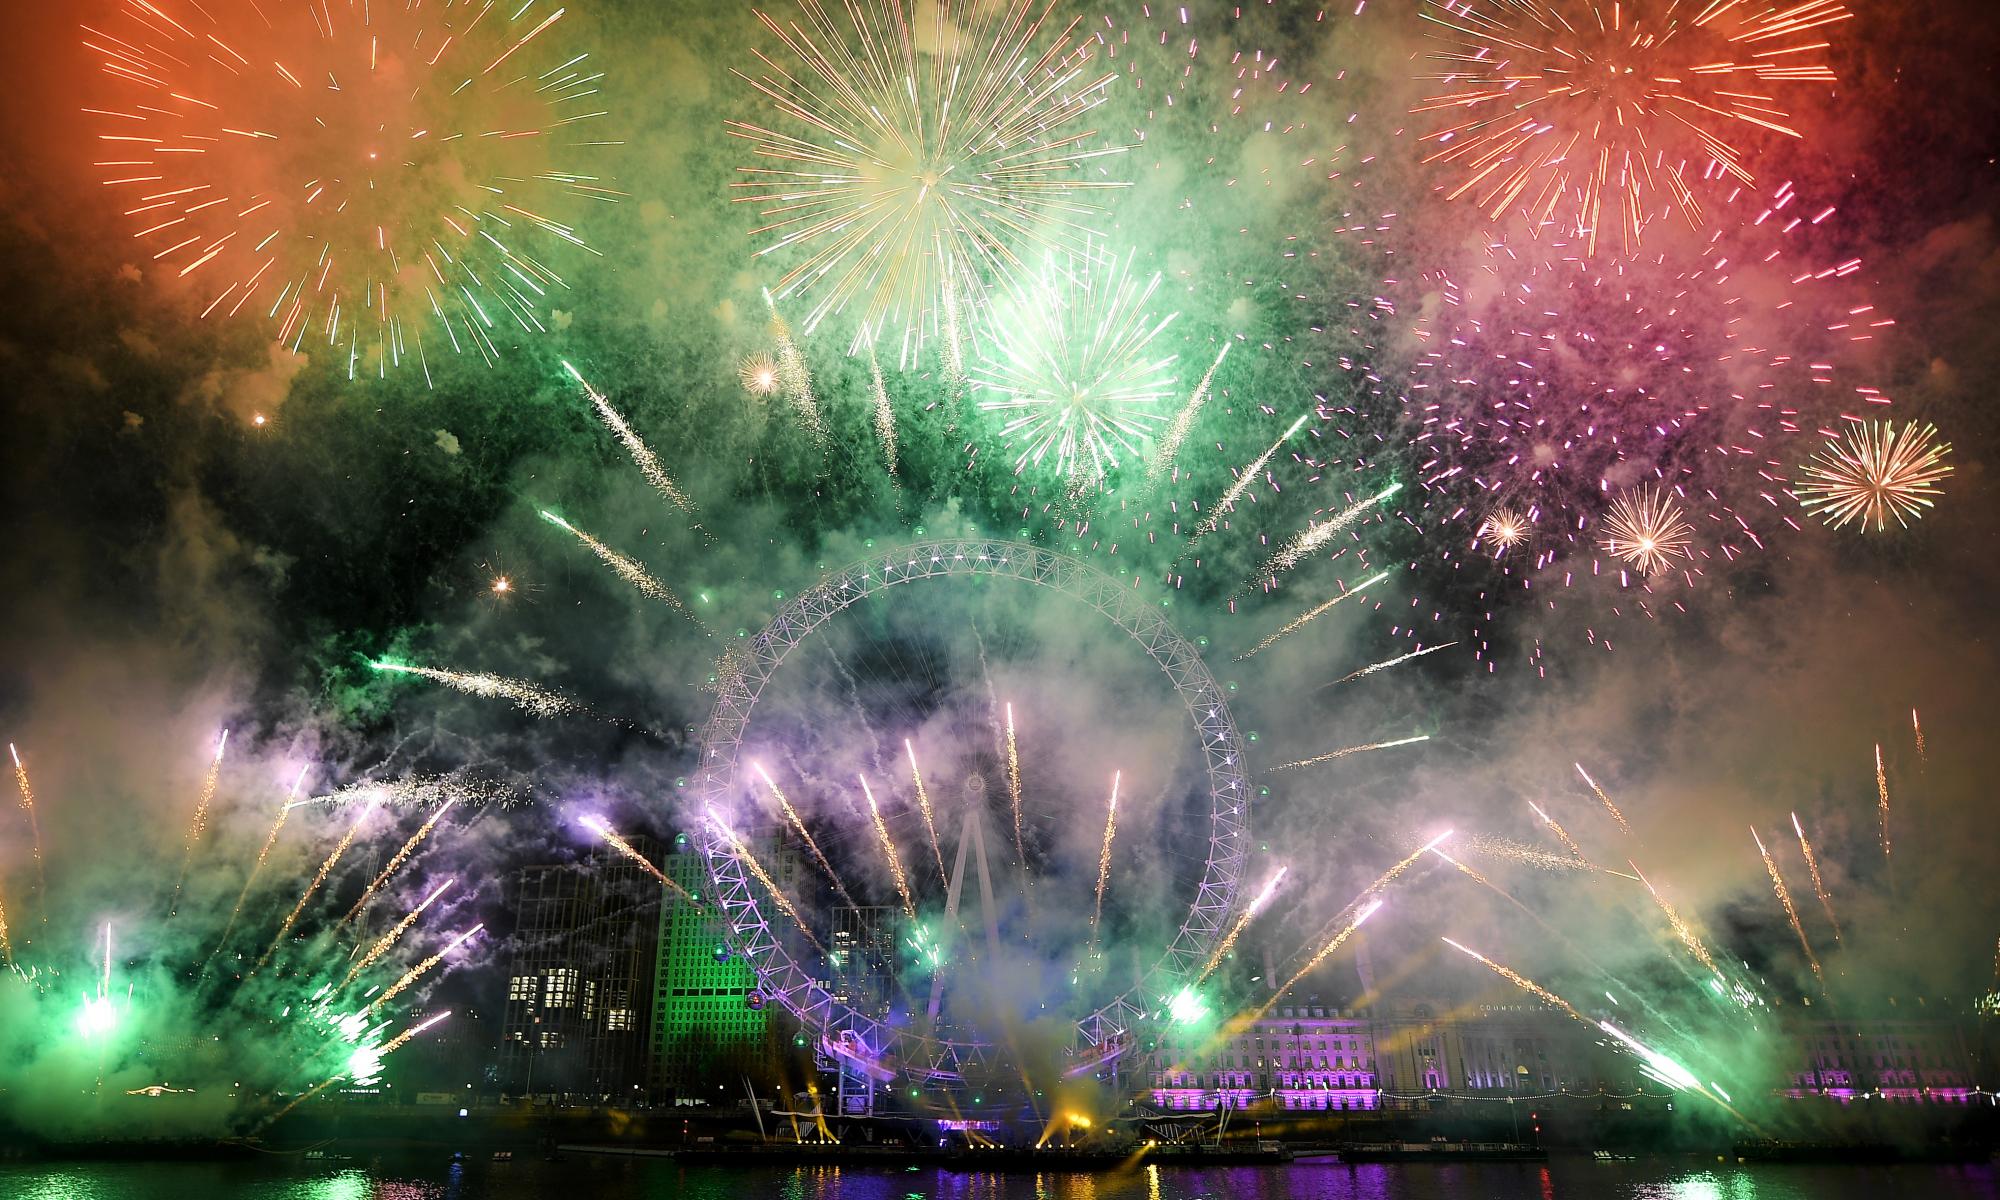 London's new year fireworks left sky full of metal particles